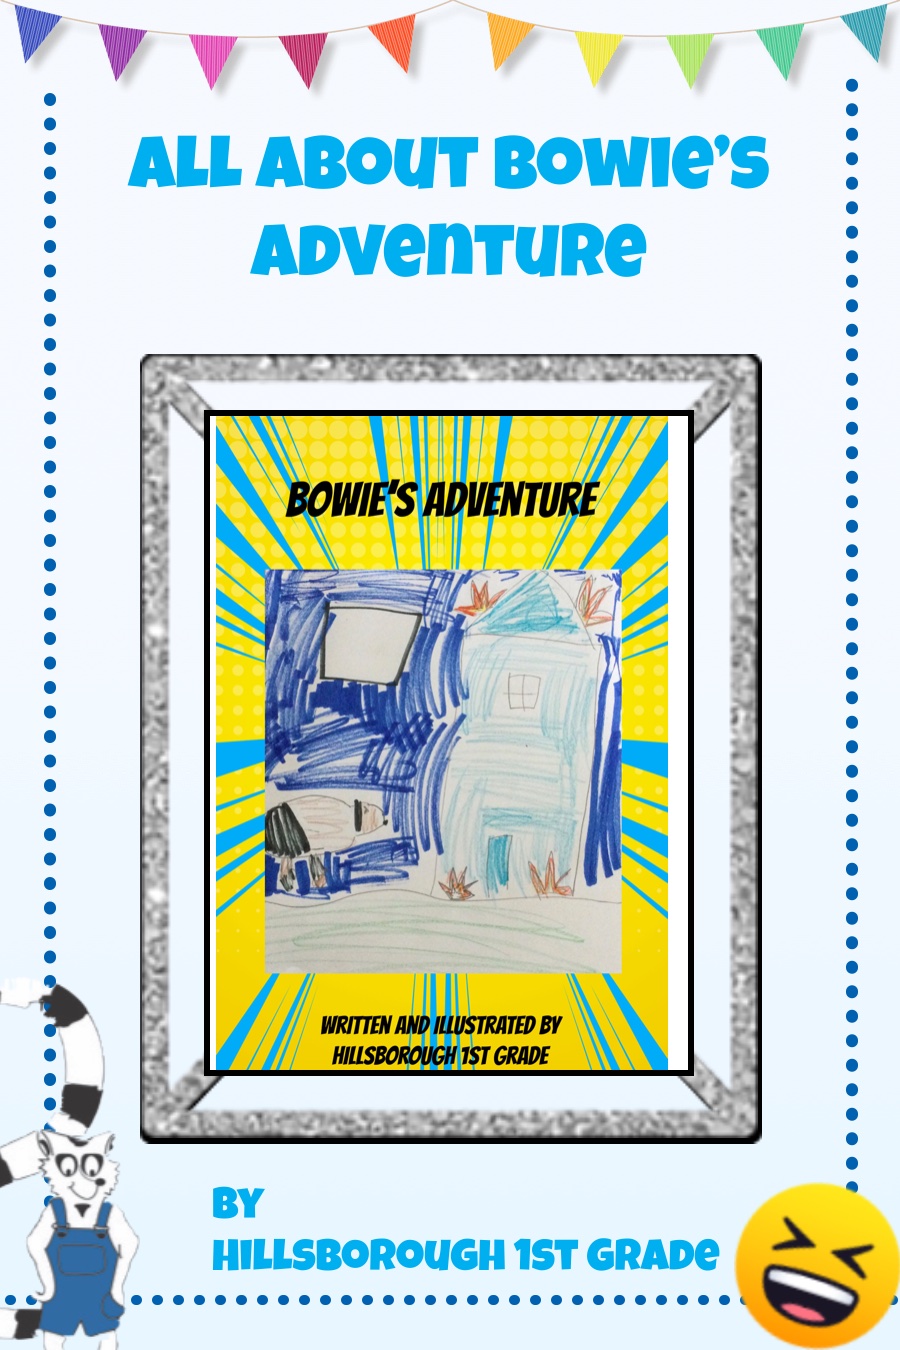 All About Bowie’s Adventure by Hillsborough 1st Grade